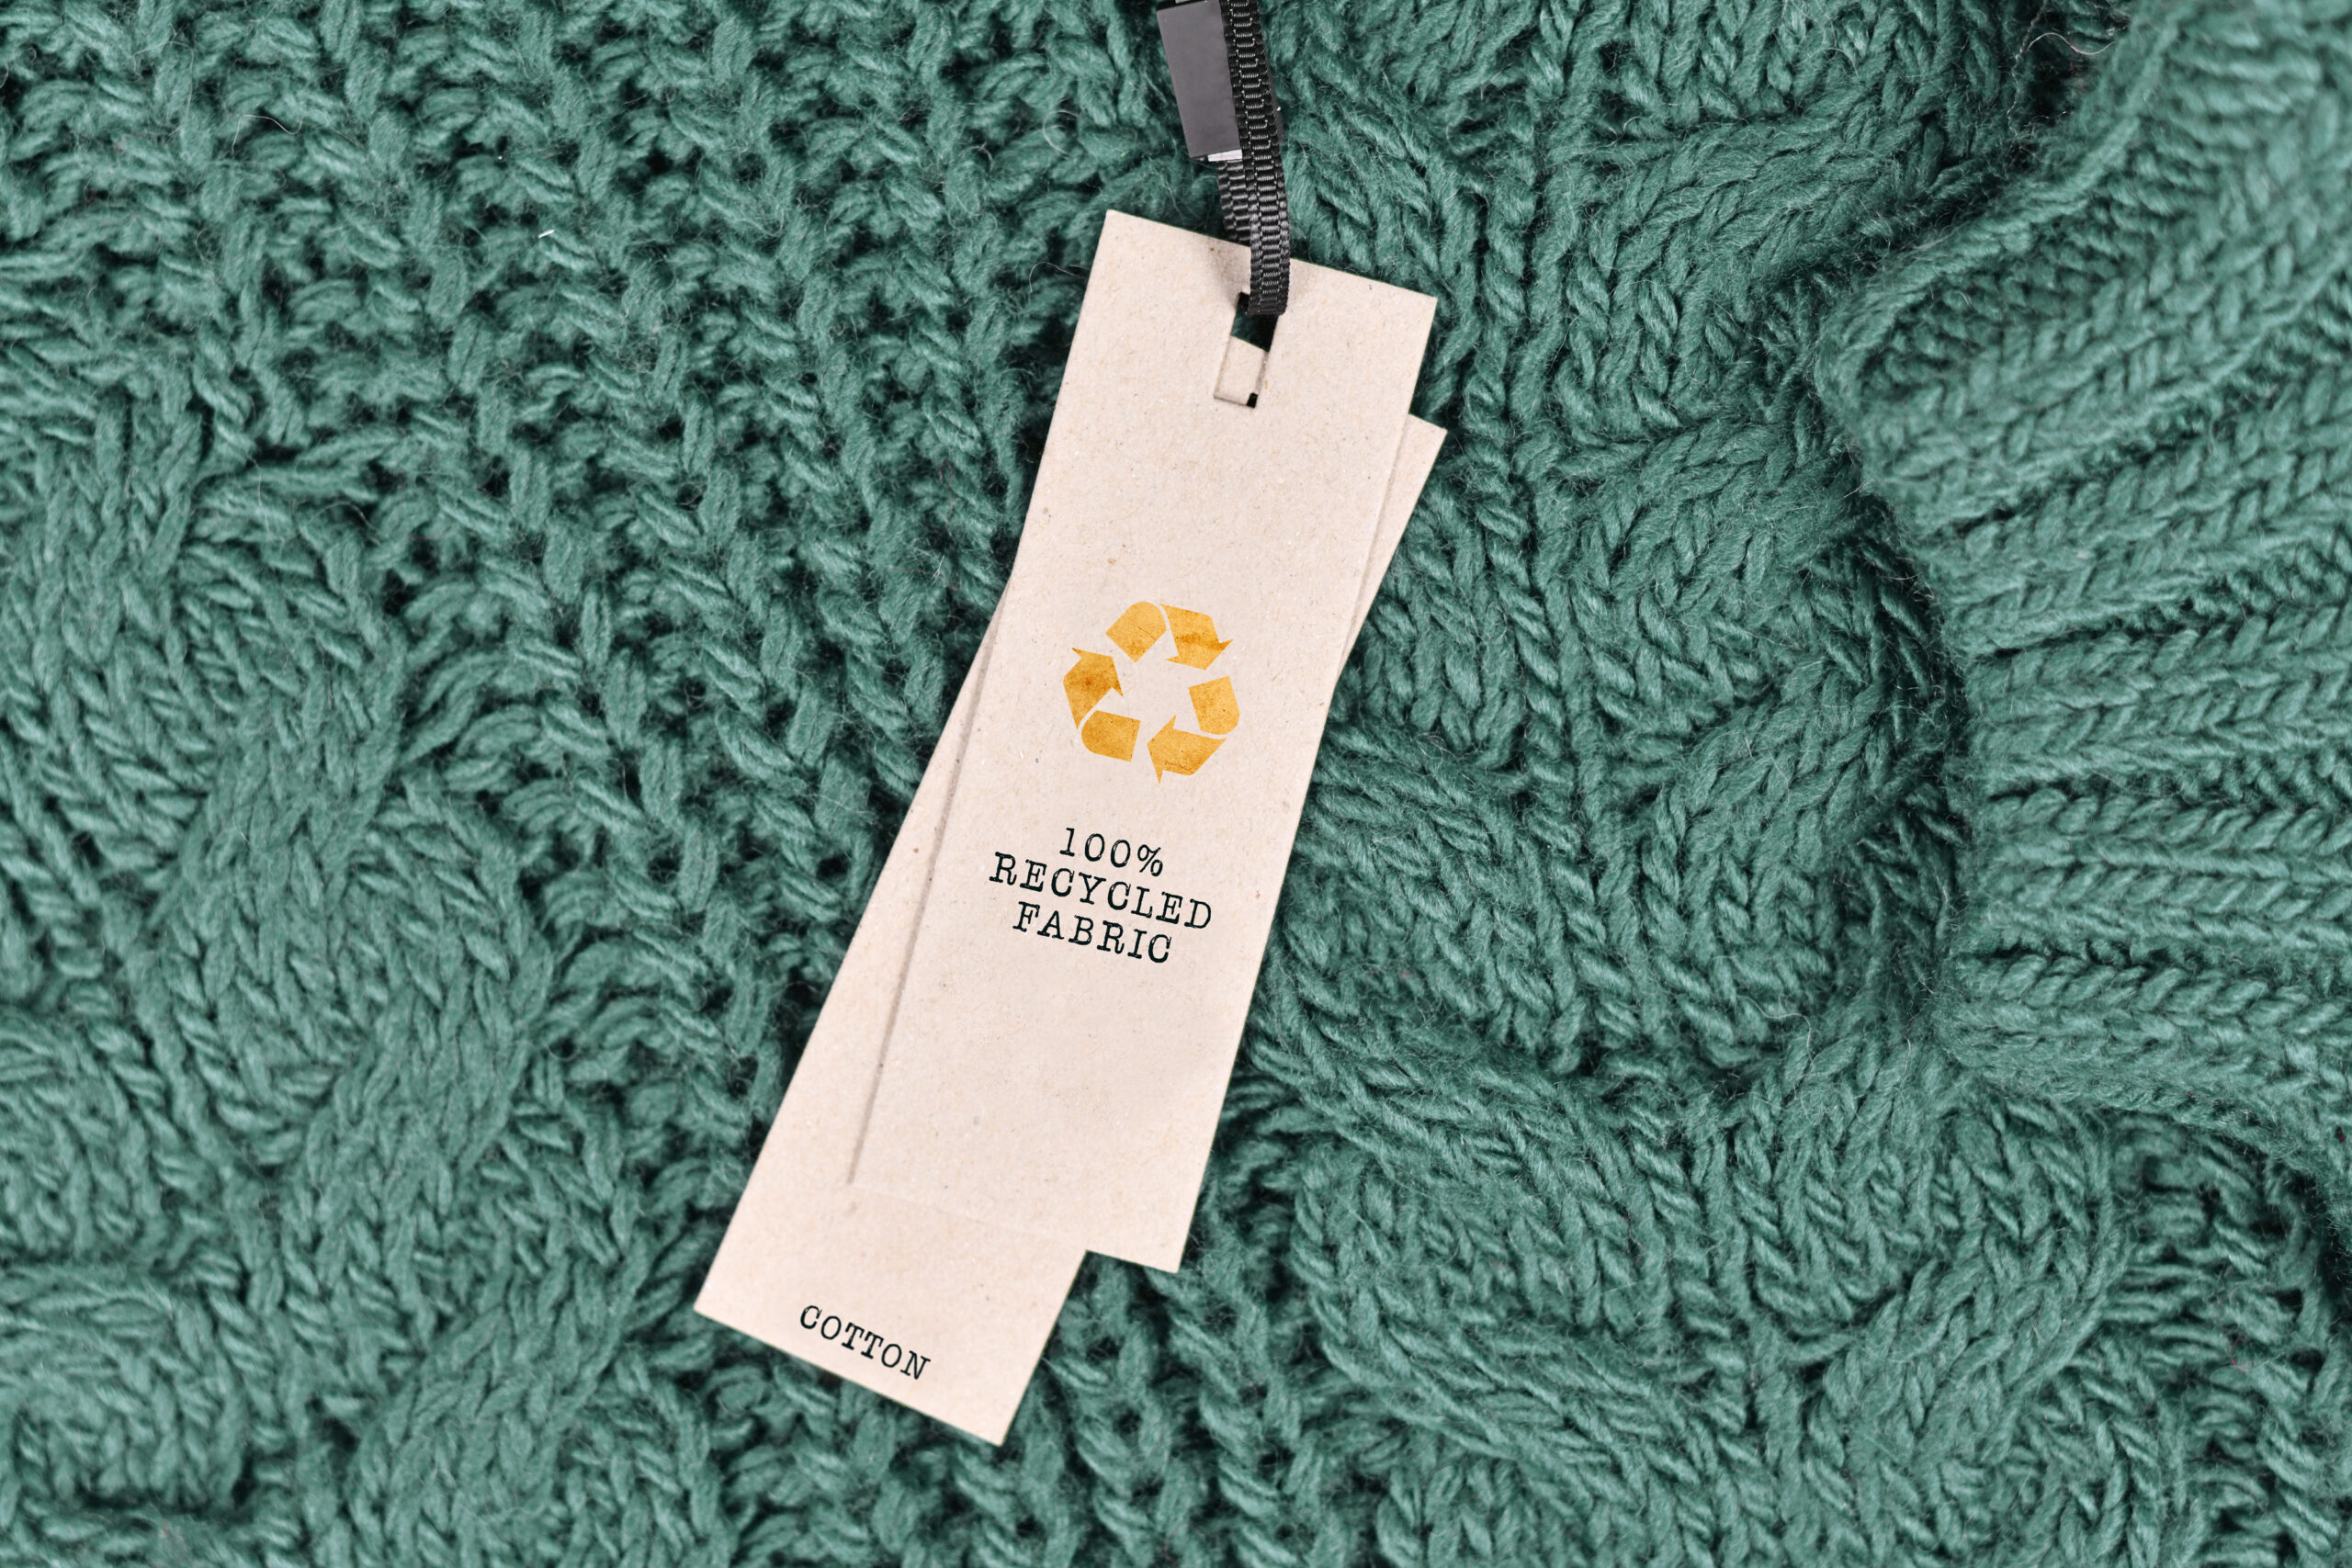 A green cotton cable-knit sweater with a “100% recycled fabric” tag